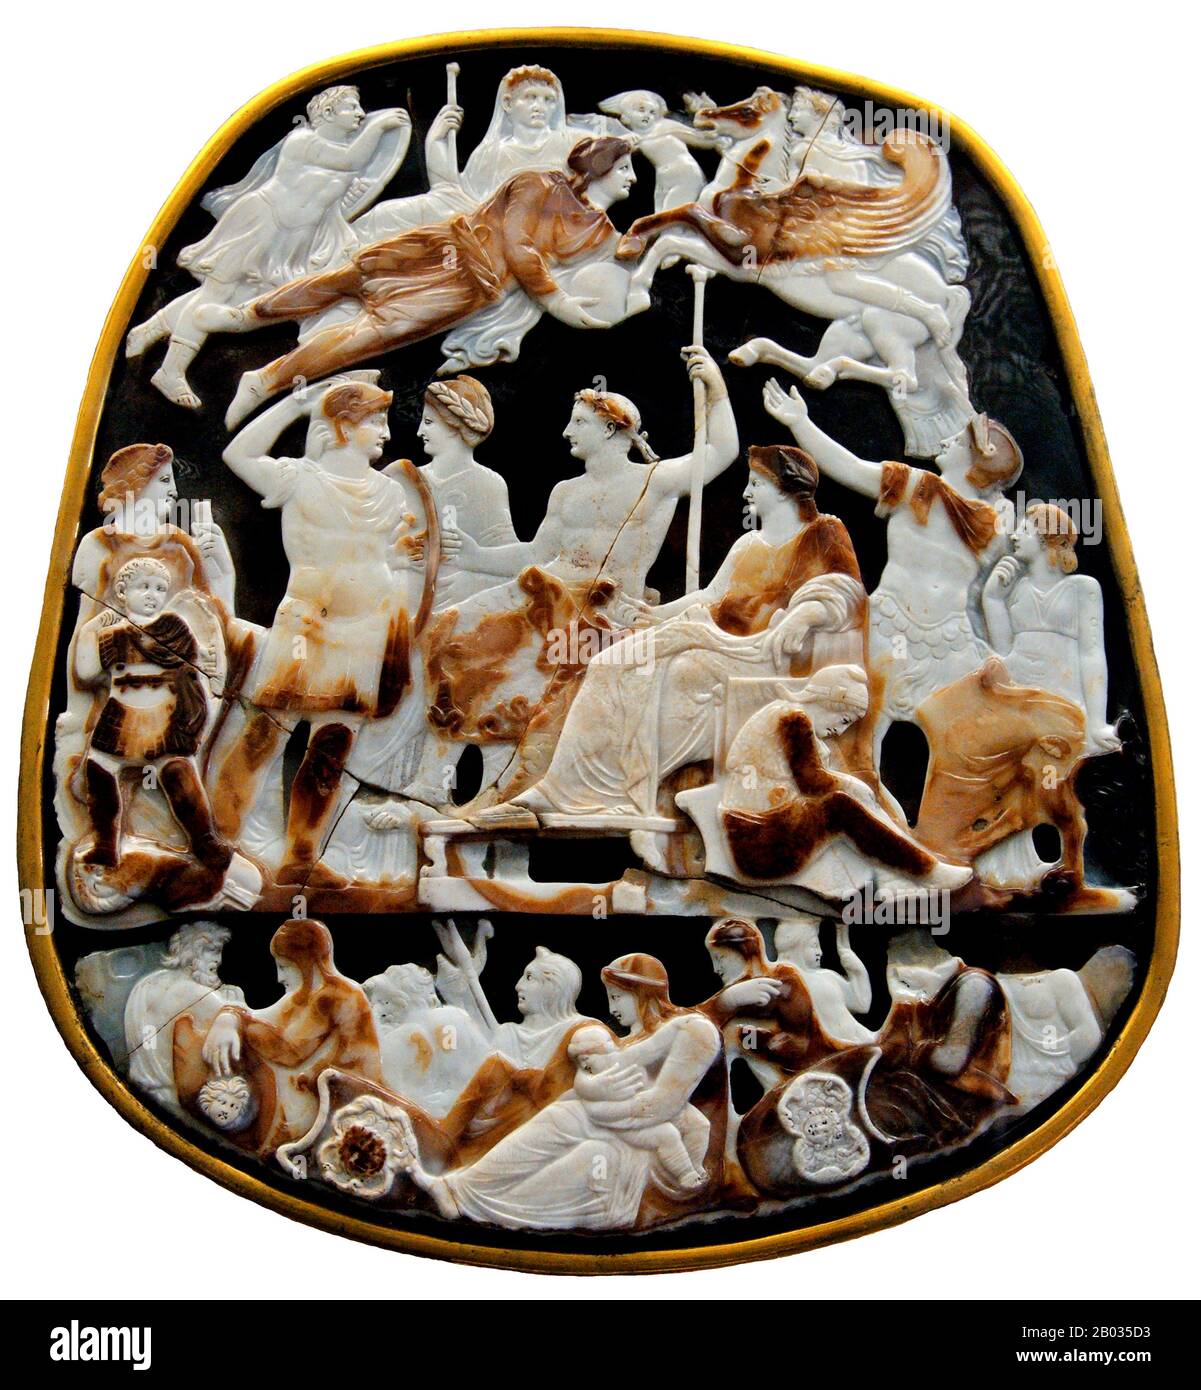 The largest Roman imperial cameo to have survived, the Great Cameo of France is engraved with fwenty-four figures from the Julio-Claudian dynasty.  The upper levels of the cameo show deceased and/or deified members of the dynasty, such as Divus Augustus (Augustus Caesar), Drusus the Younger (son of Tiberius Caesar) and Drusus the Elder (brother of Tiberius Caesar). The middle tier shows Tiberius Caesar alongside his mother Livia Drusilla (wife of Augustus Caesar) and his designated heir Germanicus. Behind Tiberius and Livius are Claudius Caesar (who was emperor when the cameo was made) and his Stock Photo